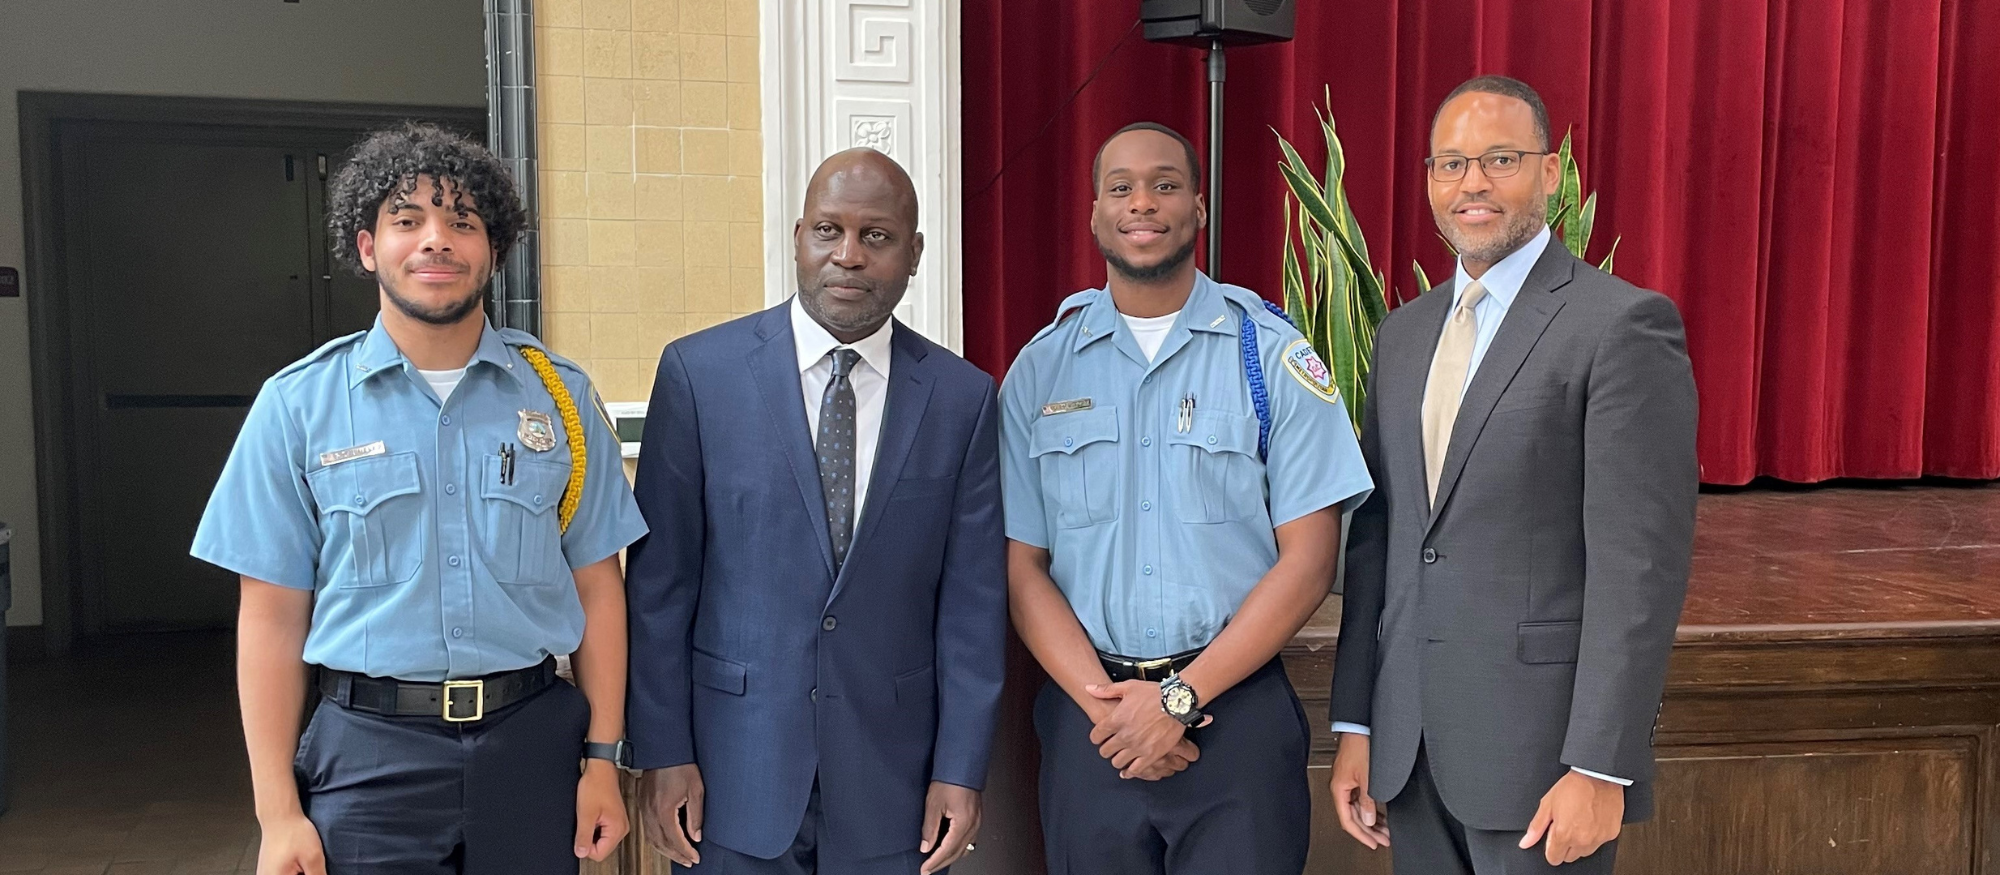 AT&T and AT&T Foundation Help University of District of Columbia Strengthen Public Safety Program and Provide Laptops to Students